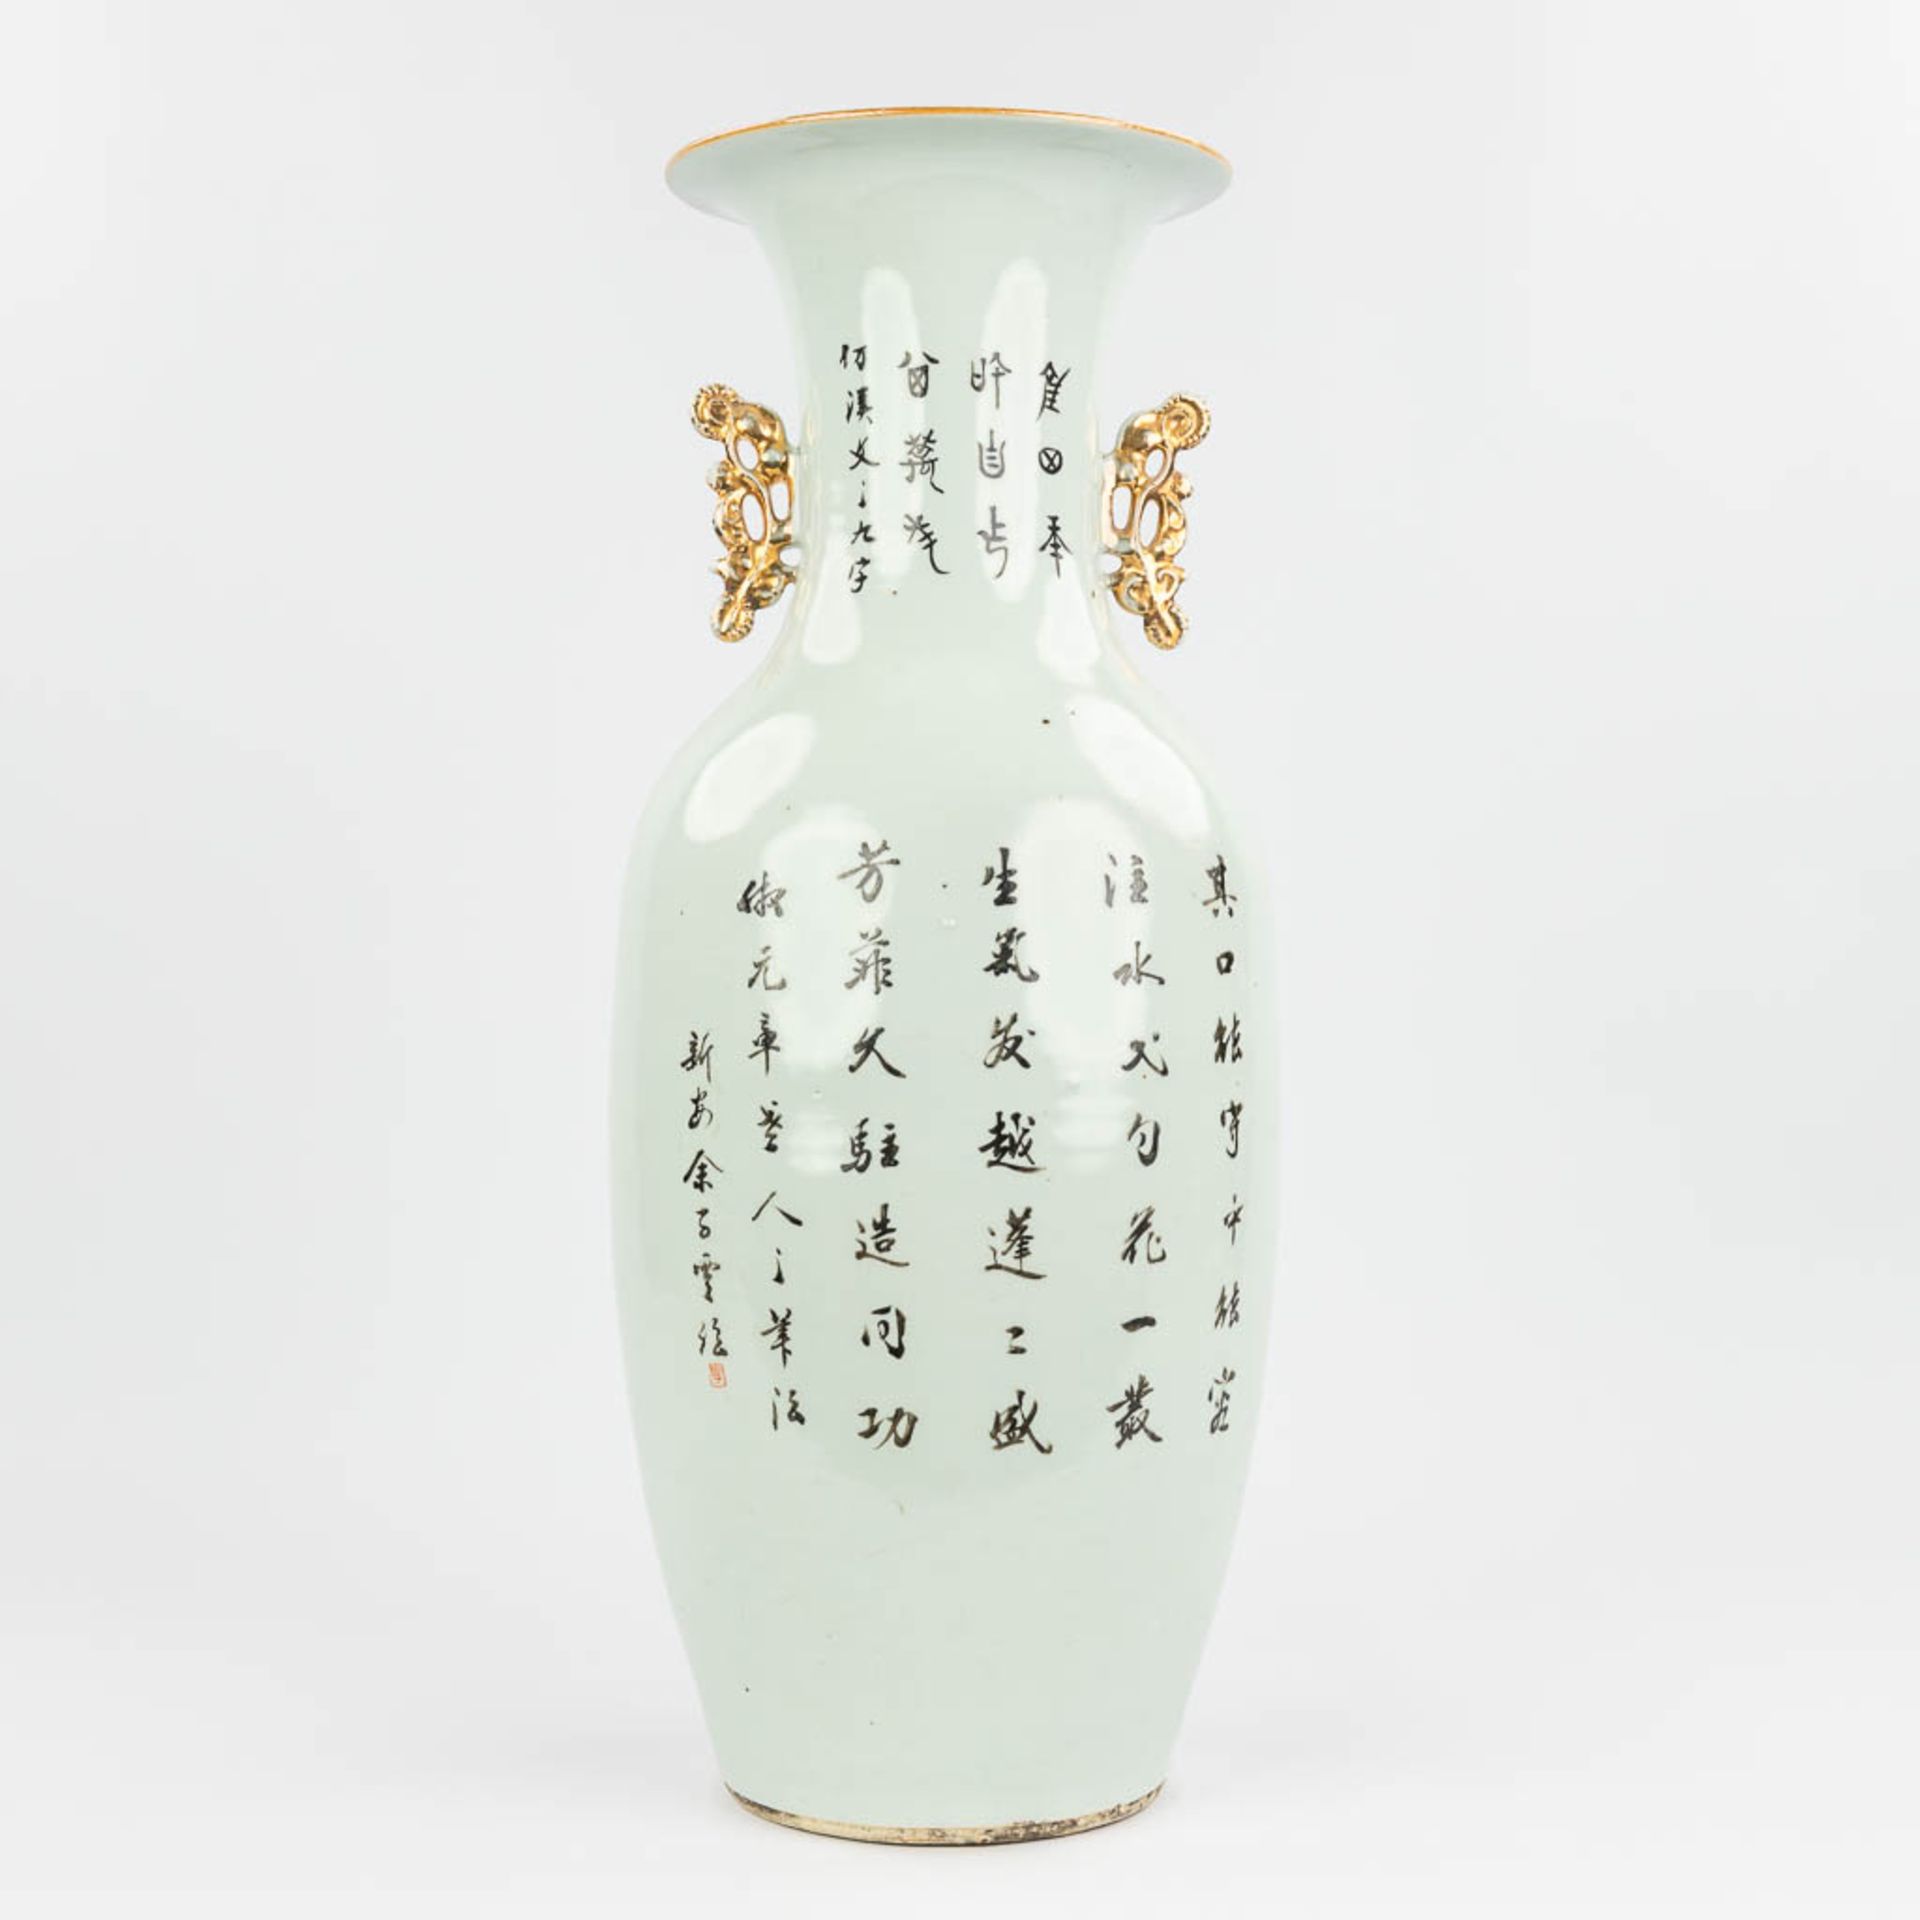 A Chinese vase made of porcelain andÊdecor of ladies near a large rock. (57,5 x 23 cm) - Image 4 of 13